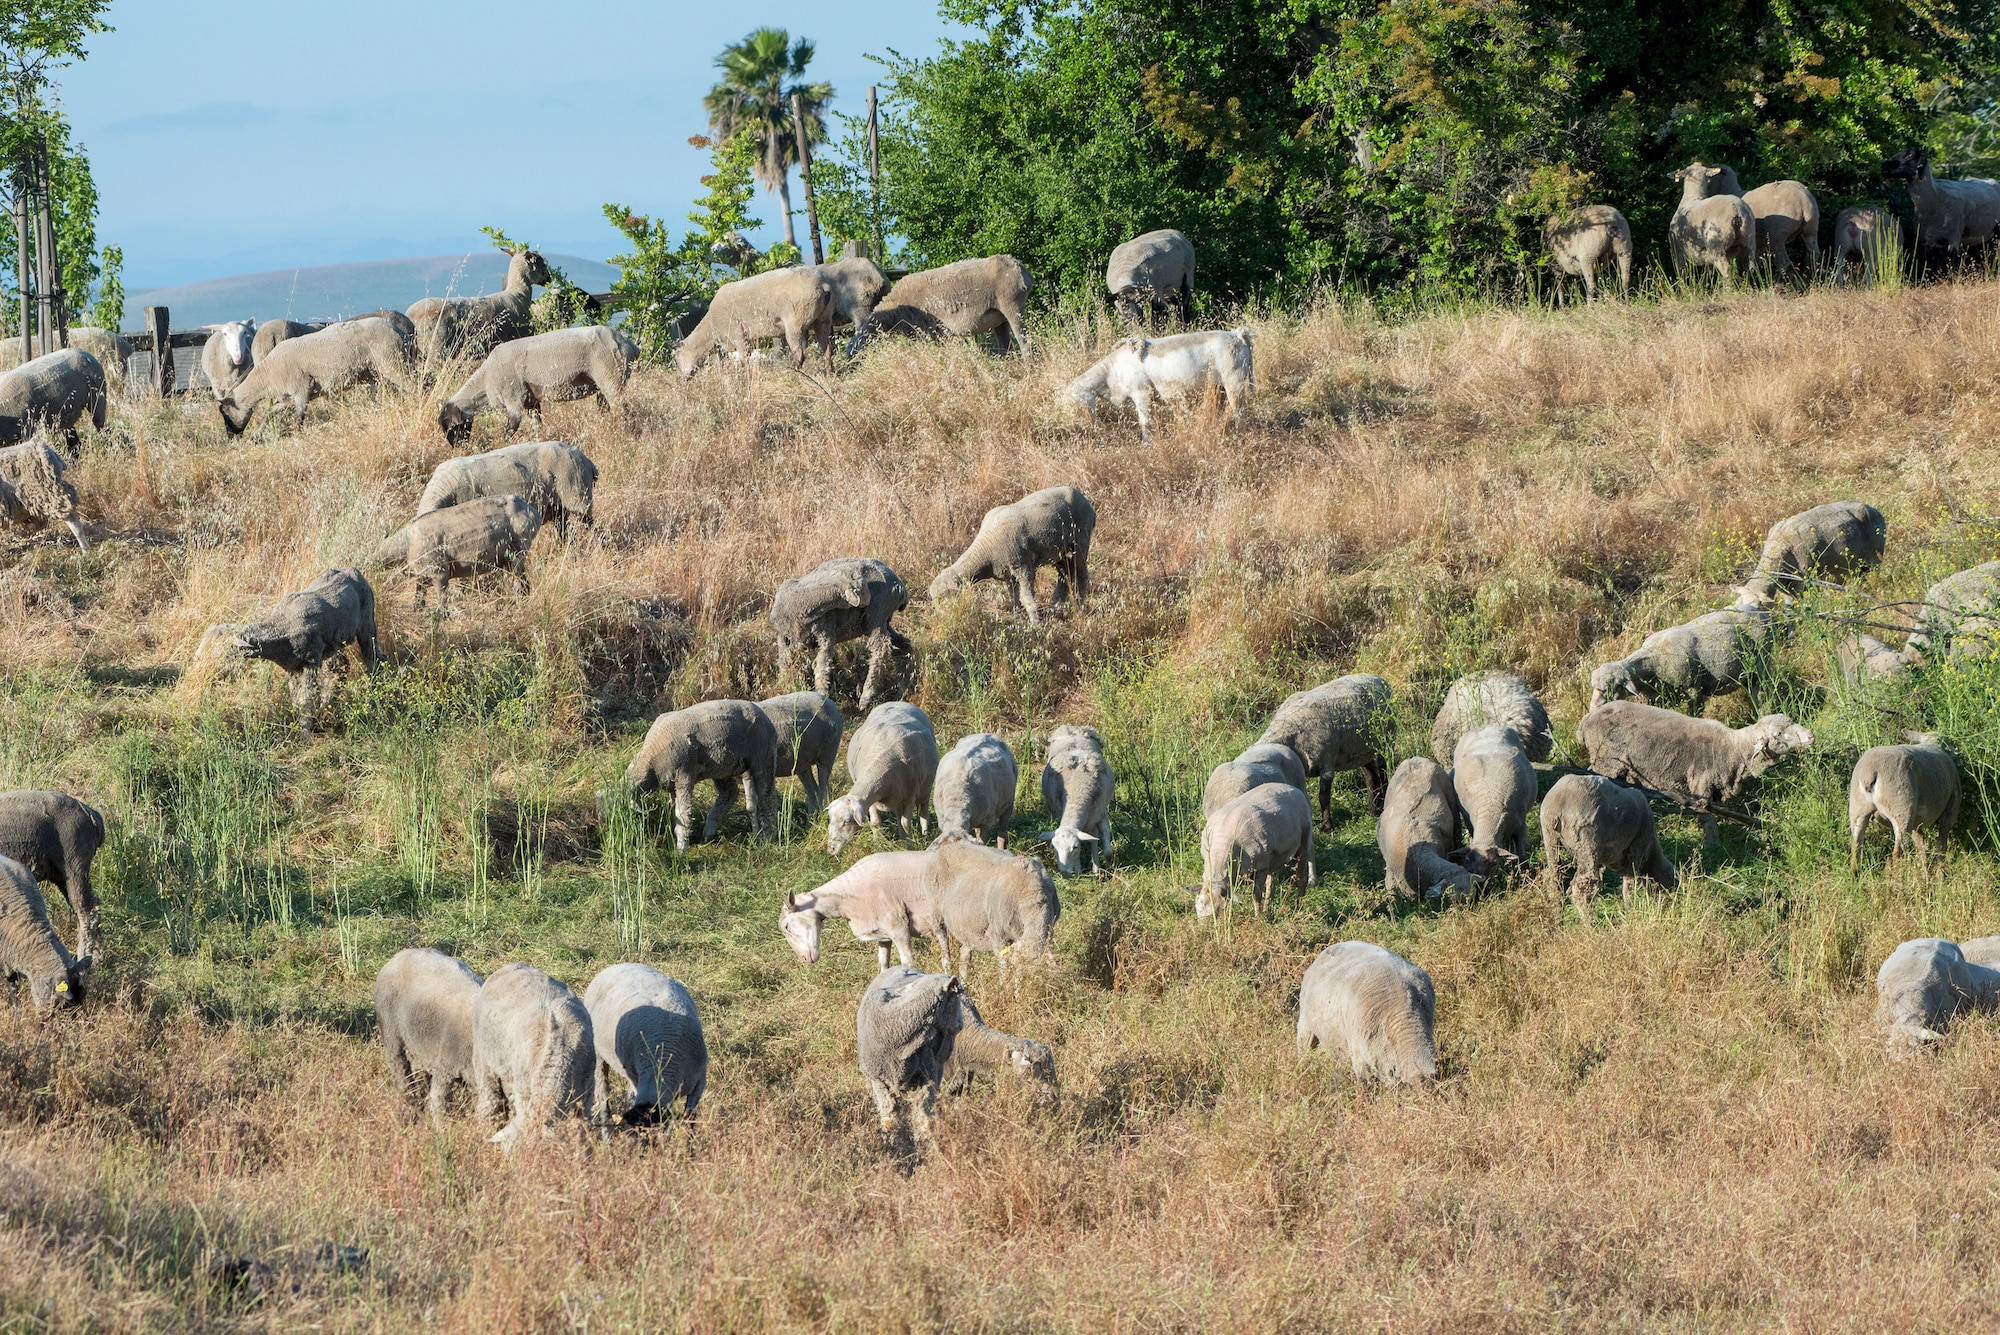 A mixed flock of approximately 300 hundred sheep and goats recently undertook the job of clearing over grown weeds and grass on Travis Air Force Base, May 17, 2018. The animals can easily clear land on steep hillsides and rough rocky terrain, and eliminates the need to dispose of the debris and the use of noisy machinery, while saving time and money. (U.S. Air Force Photo by Heide Couch)